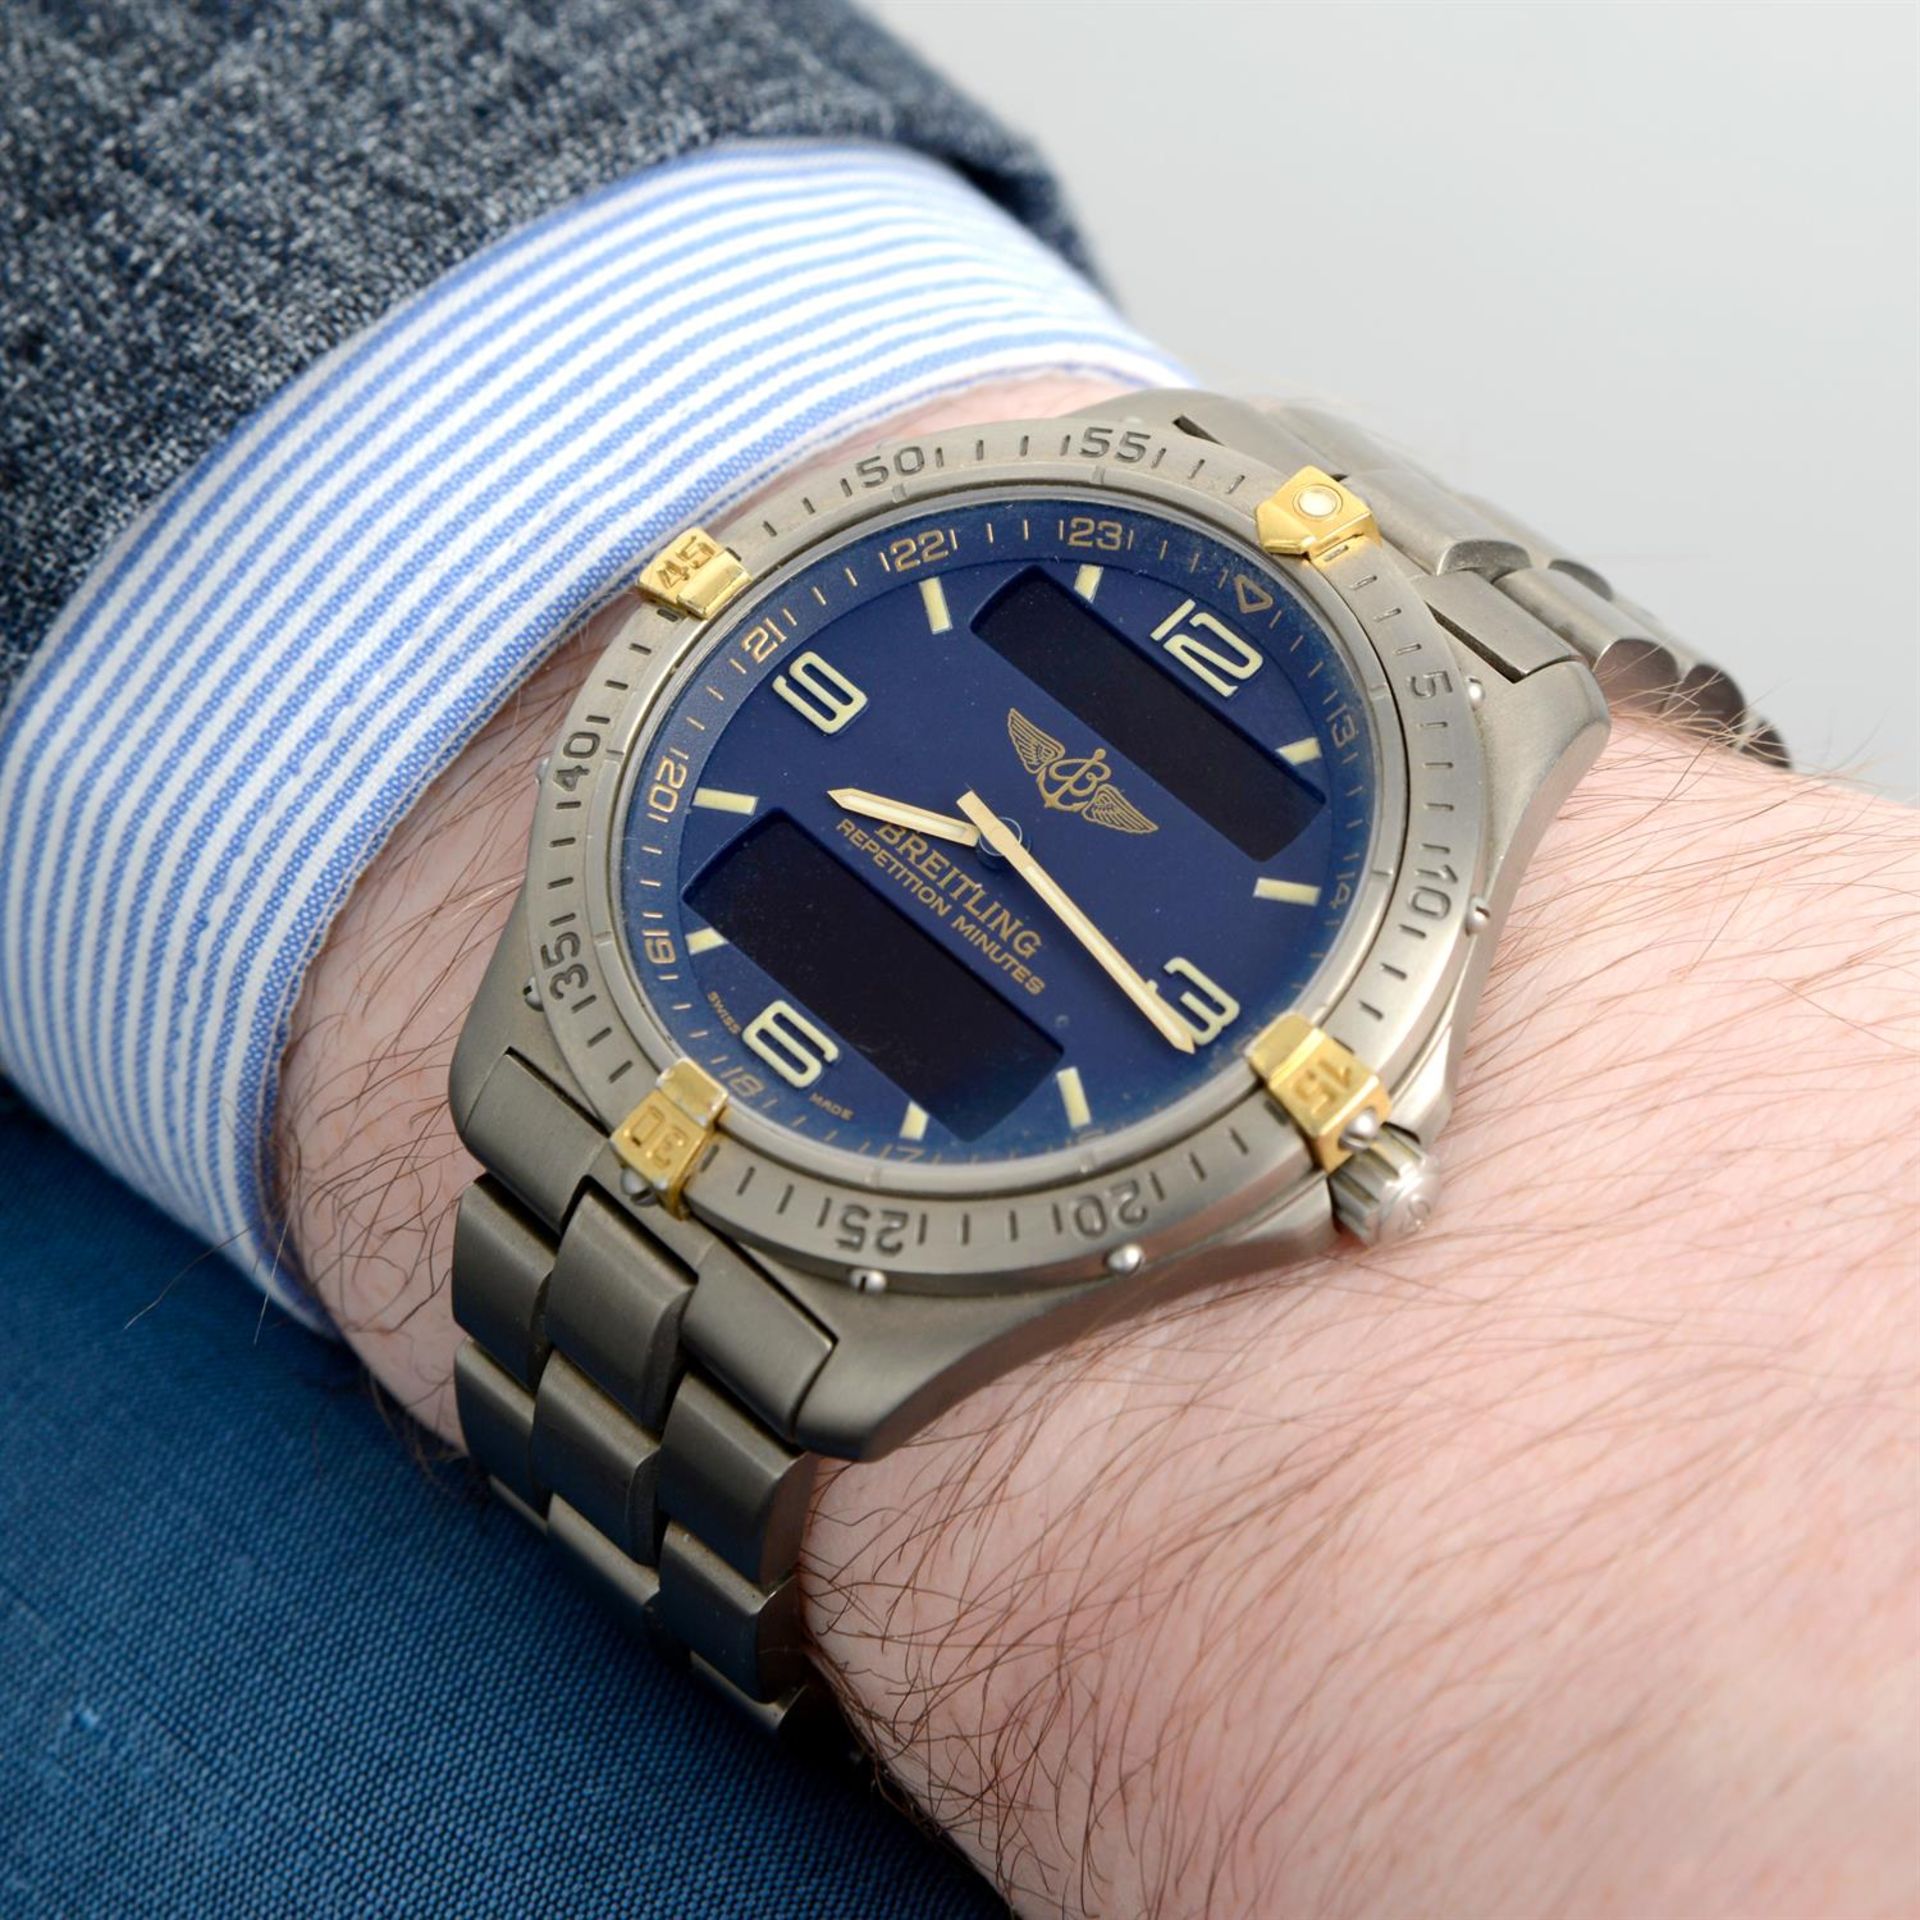 Breitling - an Aerospace watch, 40mm. - Image 5 of 5